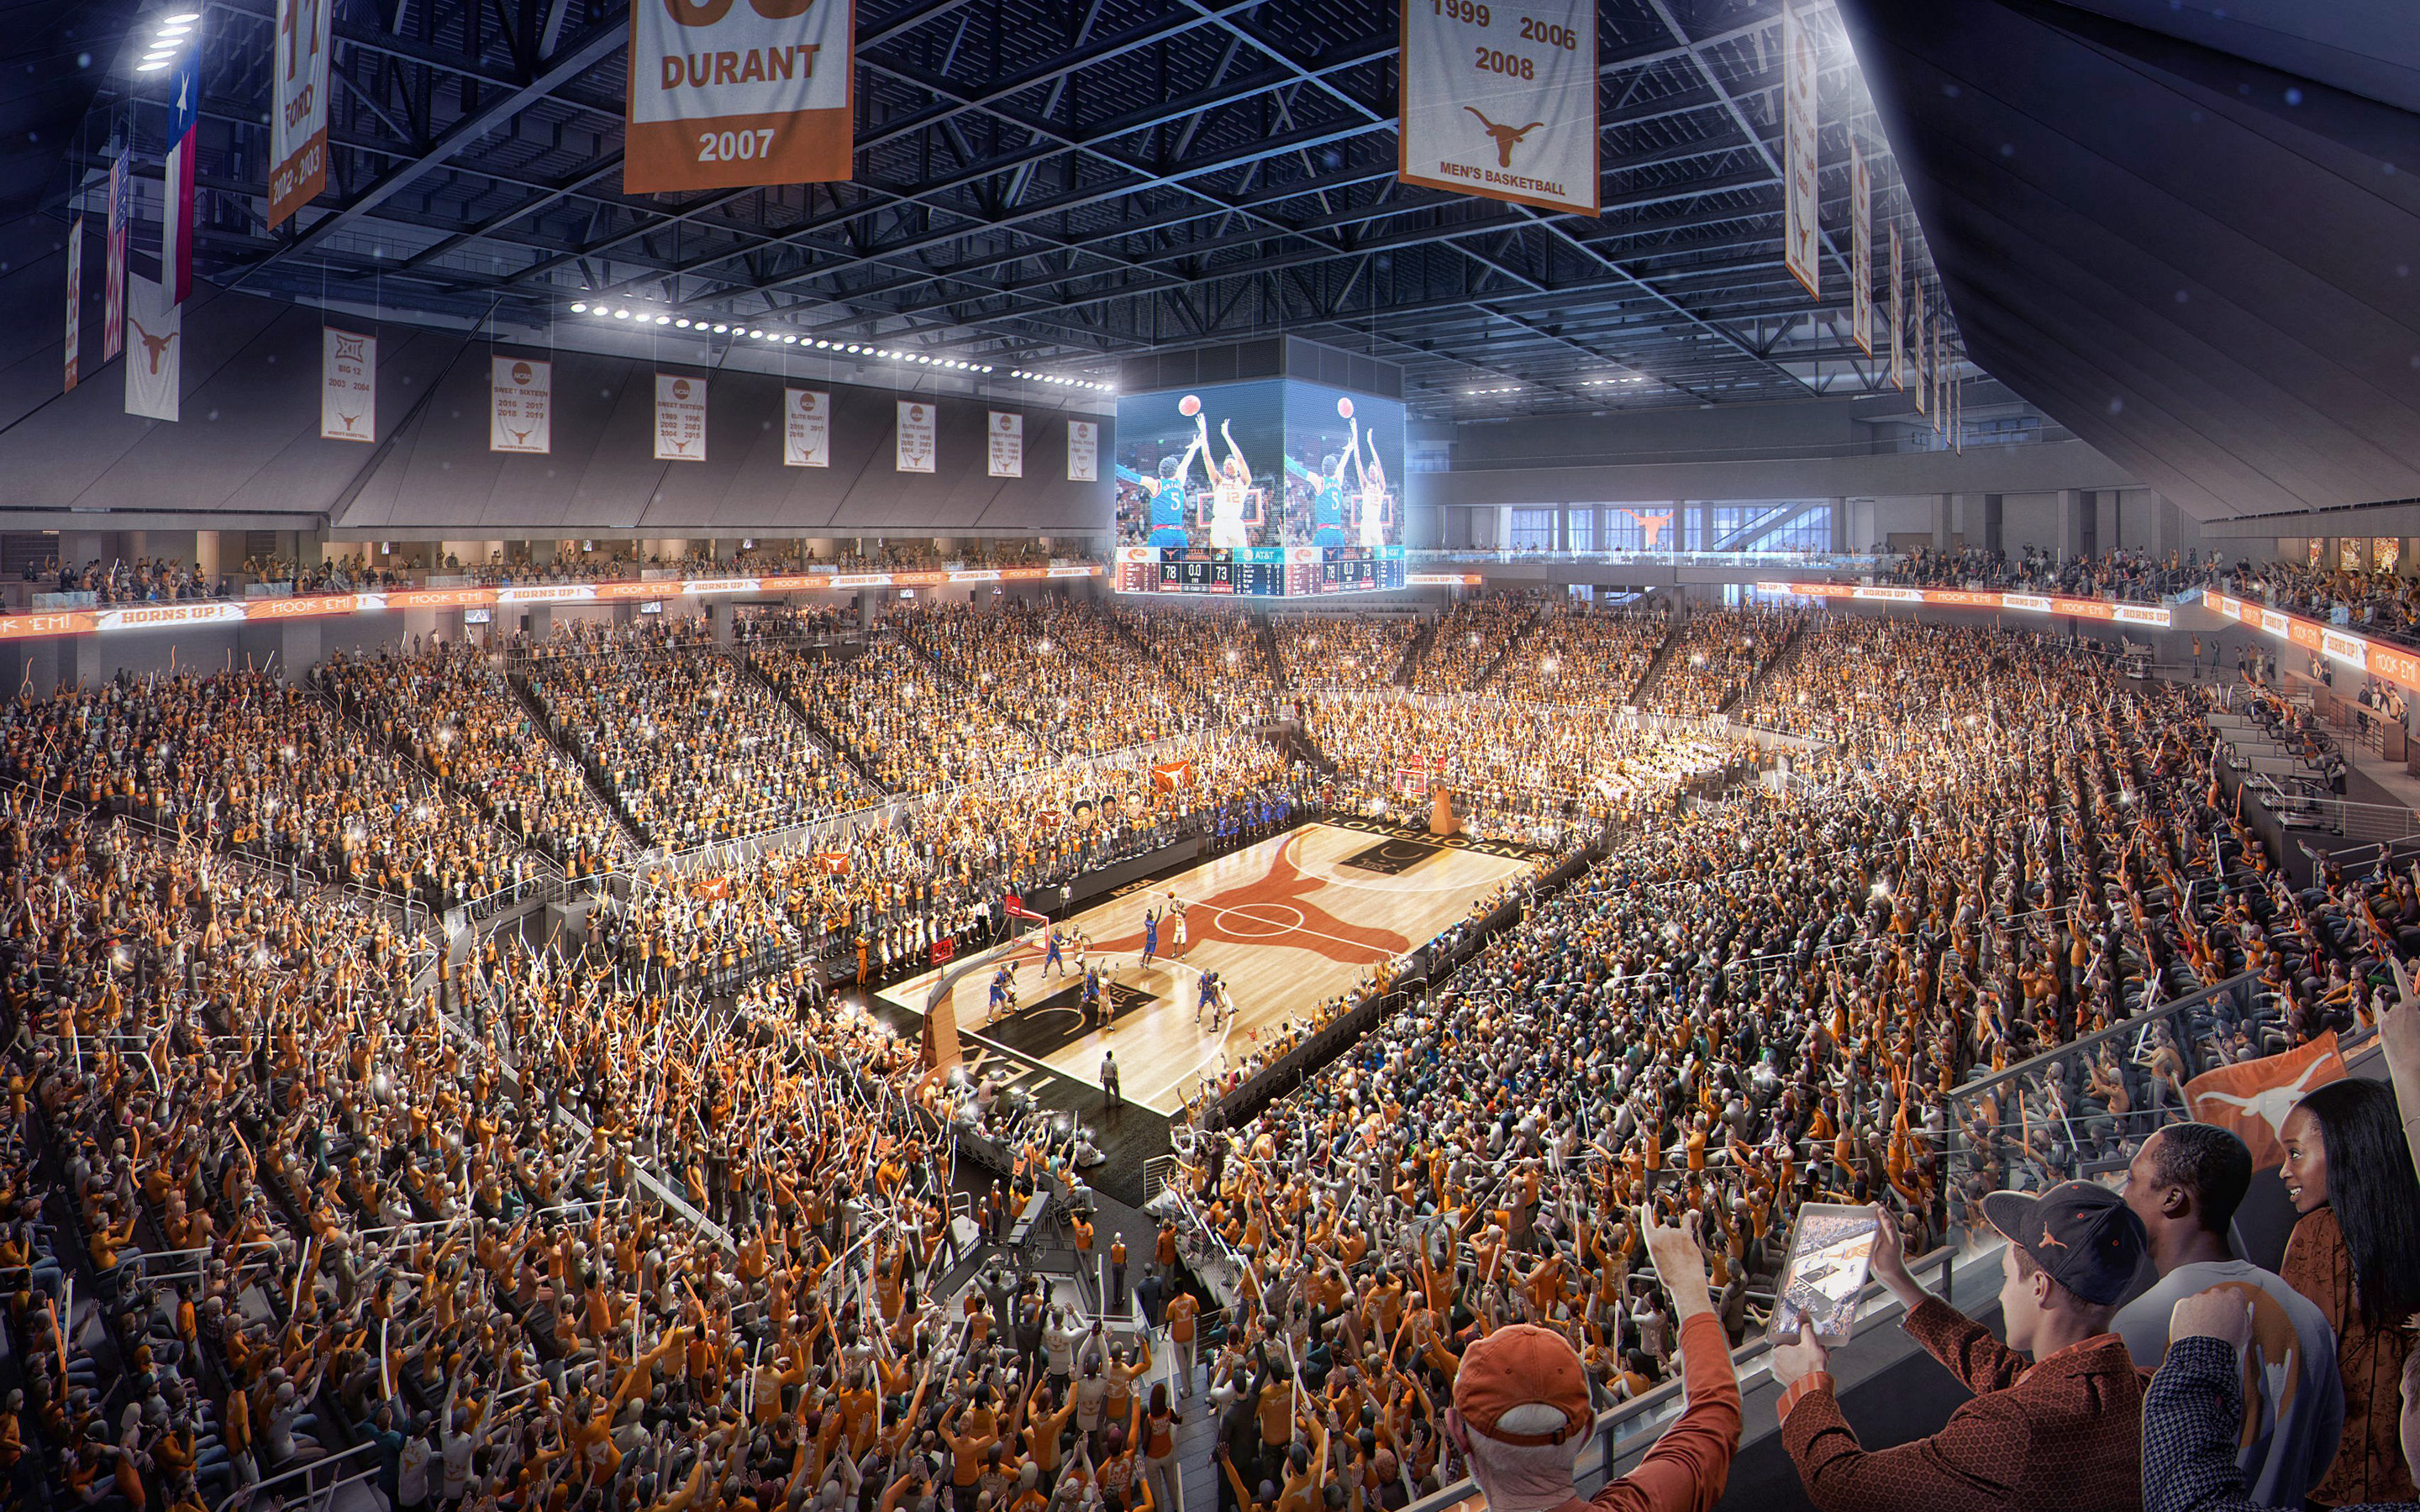 Download wallpaper Moody Center, Texas Longhorns, basketball arena, Austin, Texas, University of Texas at Austin, basketball, USA for desktop with resolution 2880x1800. High Quality HD picture wallpaper